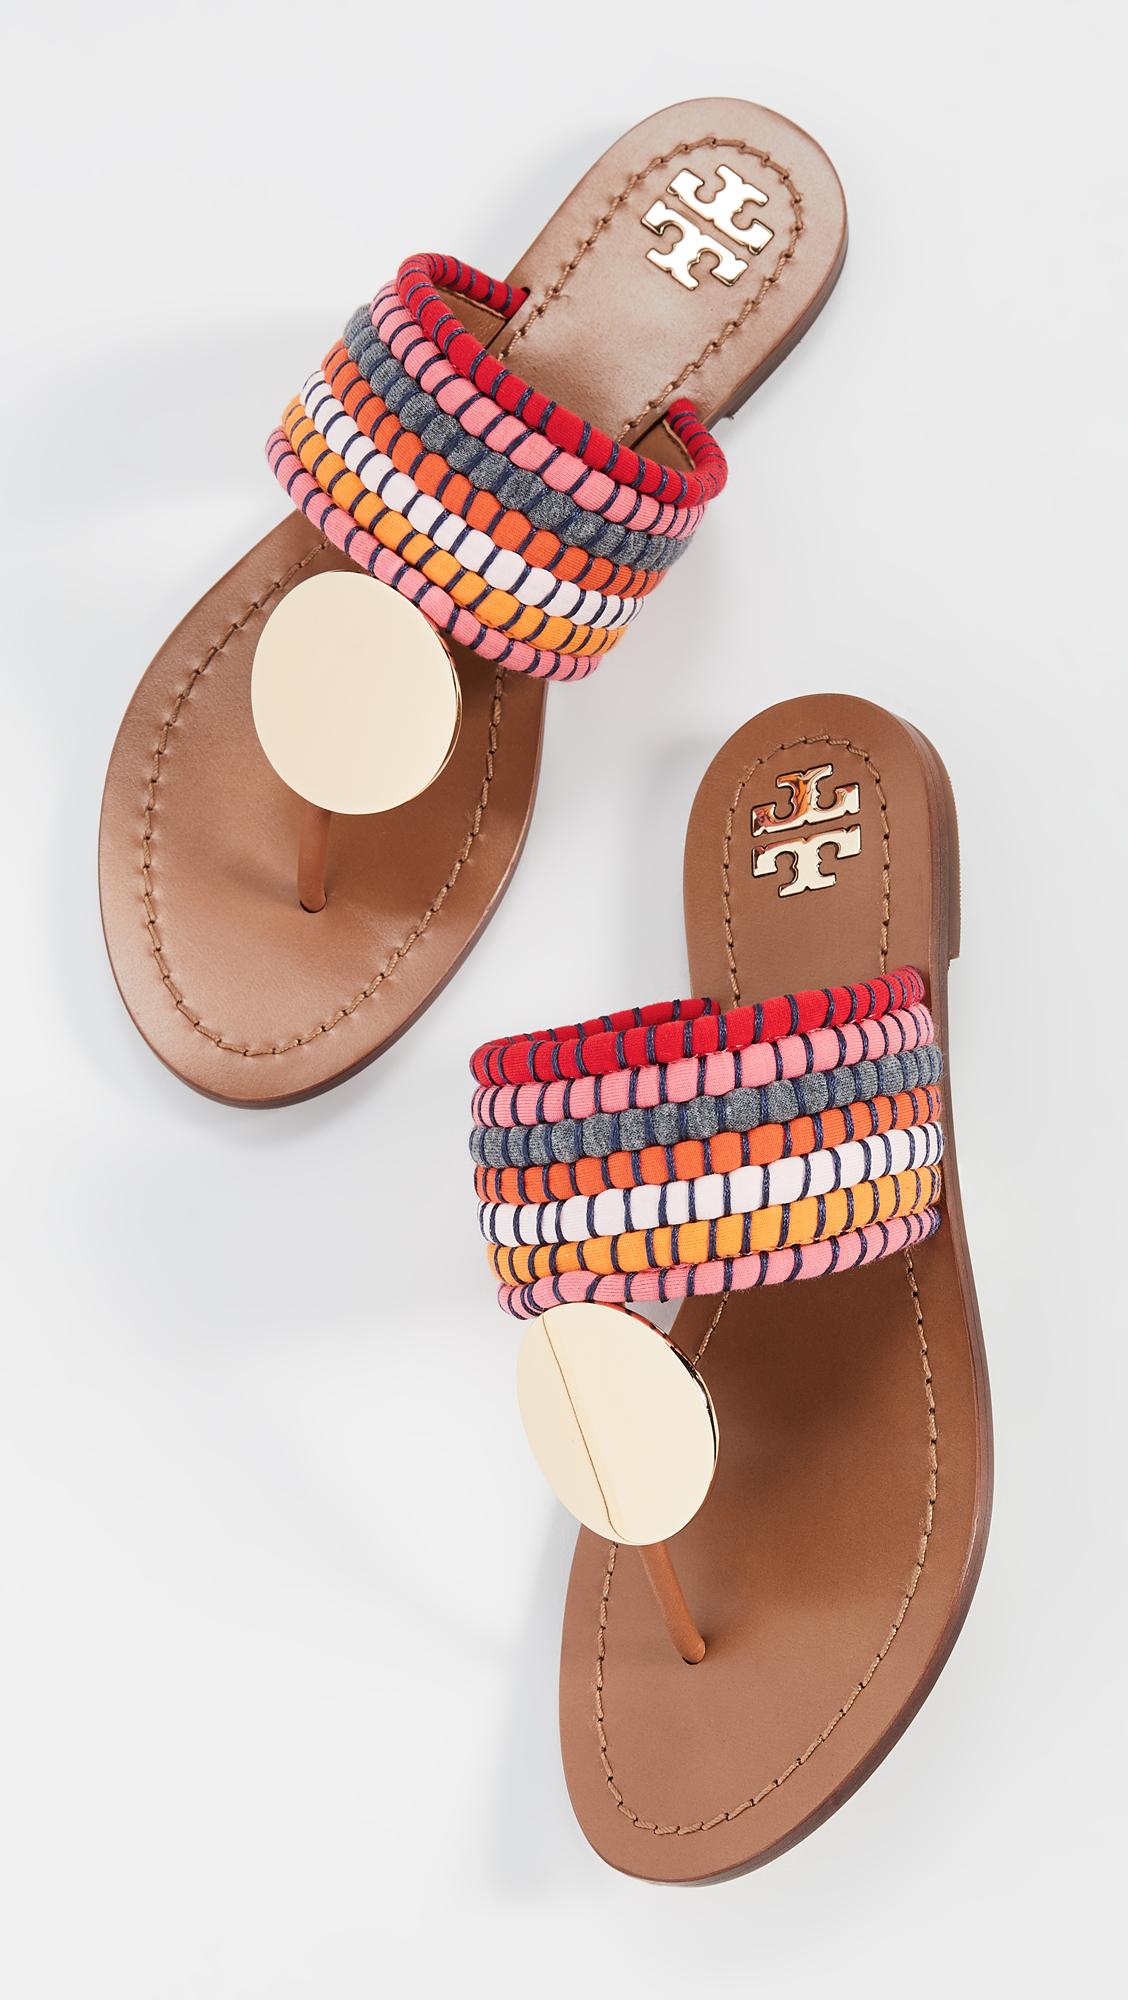 Tory Burch Leather Patos Disk Sandals in Red - Lyst